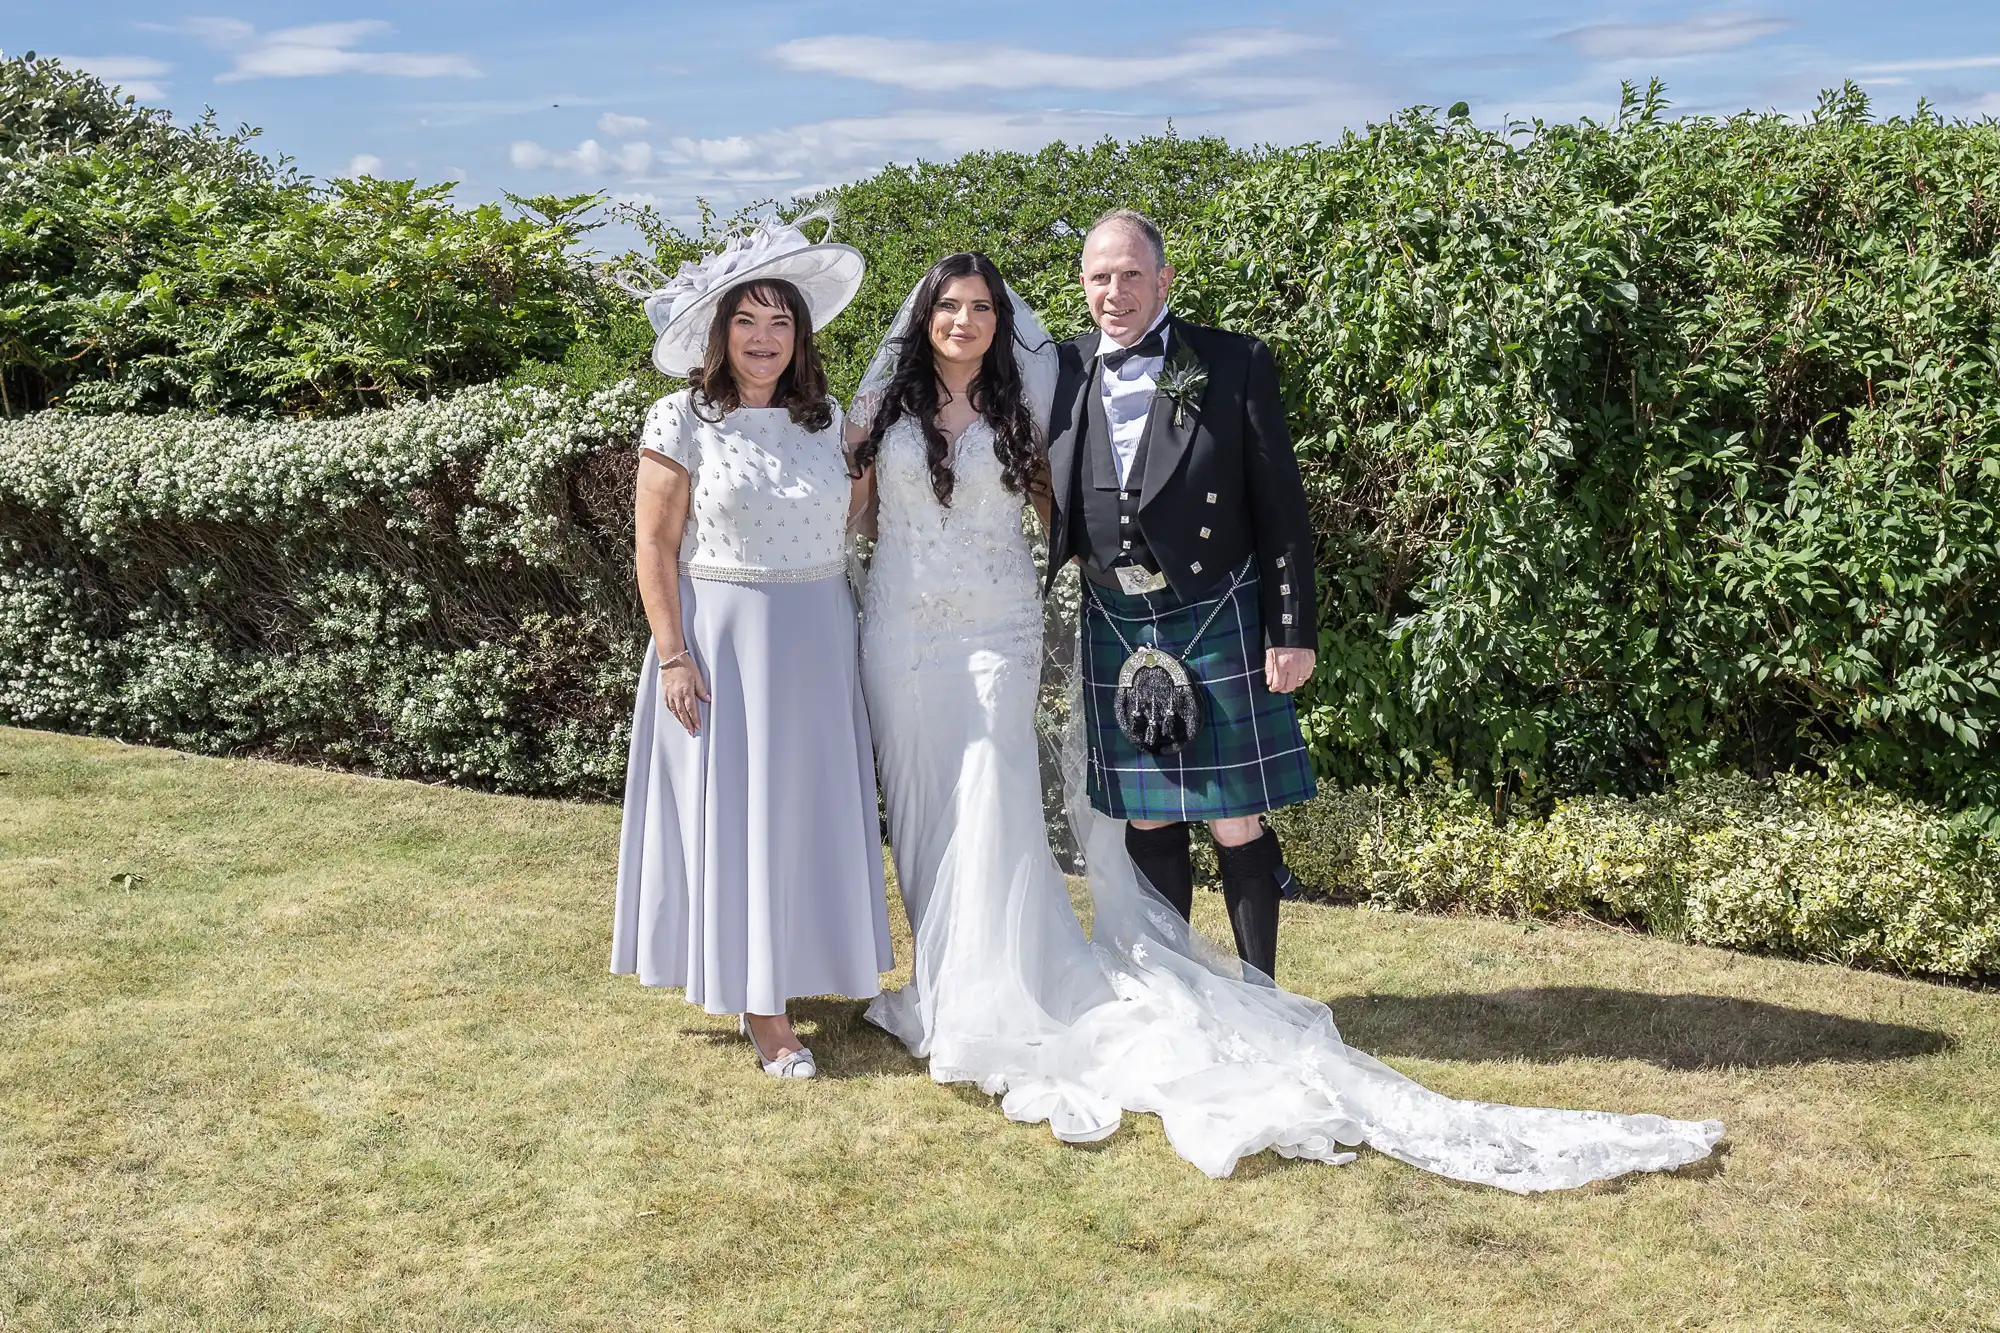 A bride in a white gown with a train stands next to a man in a kilt and an older woman in a white midi dress and hat, all smiling in front of a hedge under a clear sky.